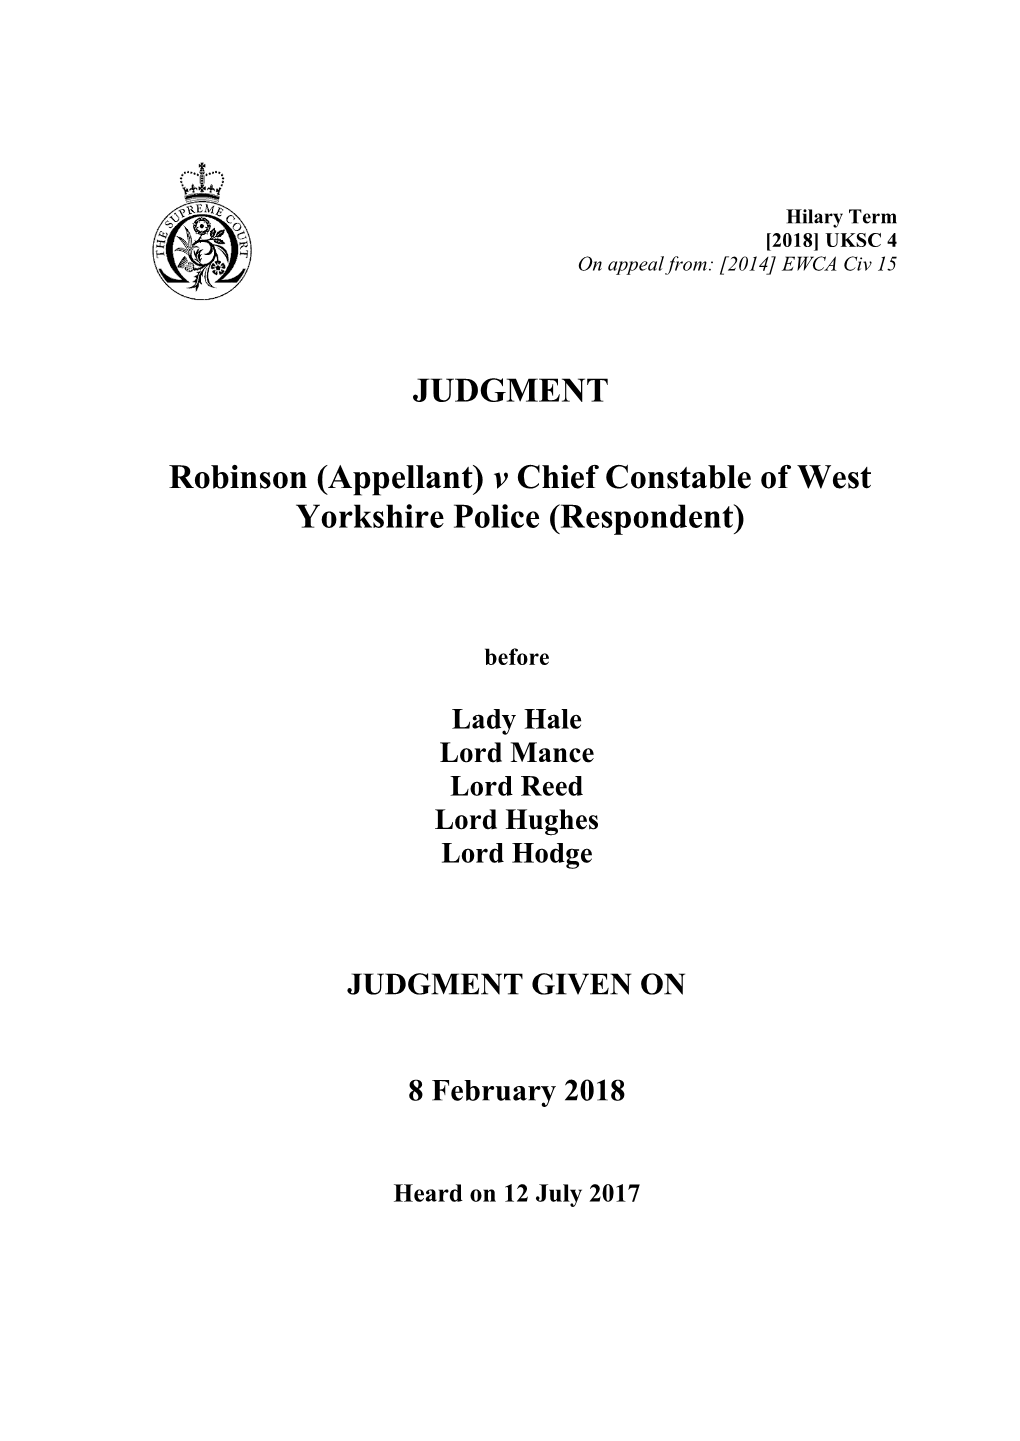 V Chief Constable of West Yorkshire Police (Respondent)